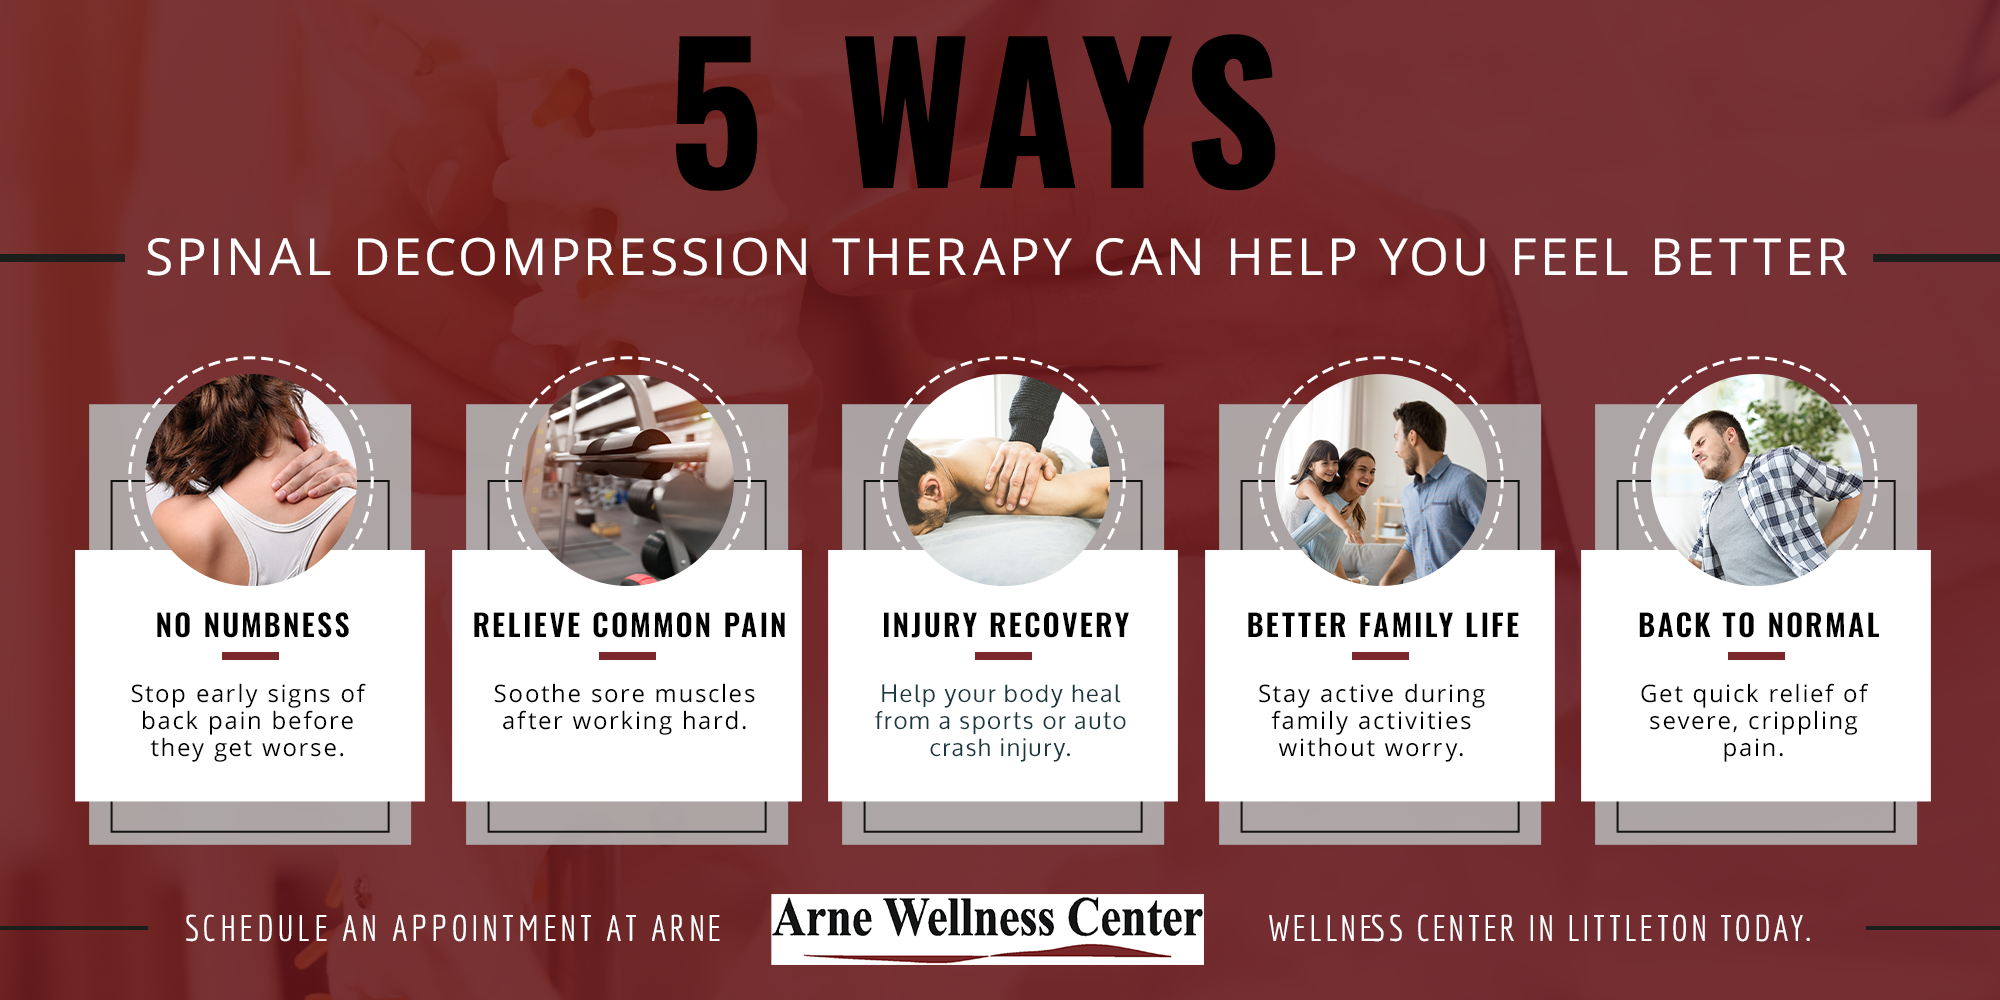 5-Ways-Spinal-Decompression-Therapy-Can-Help-You-Feel-Better-60bff6b69ae36